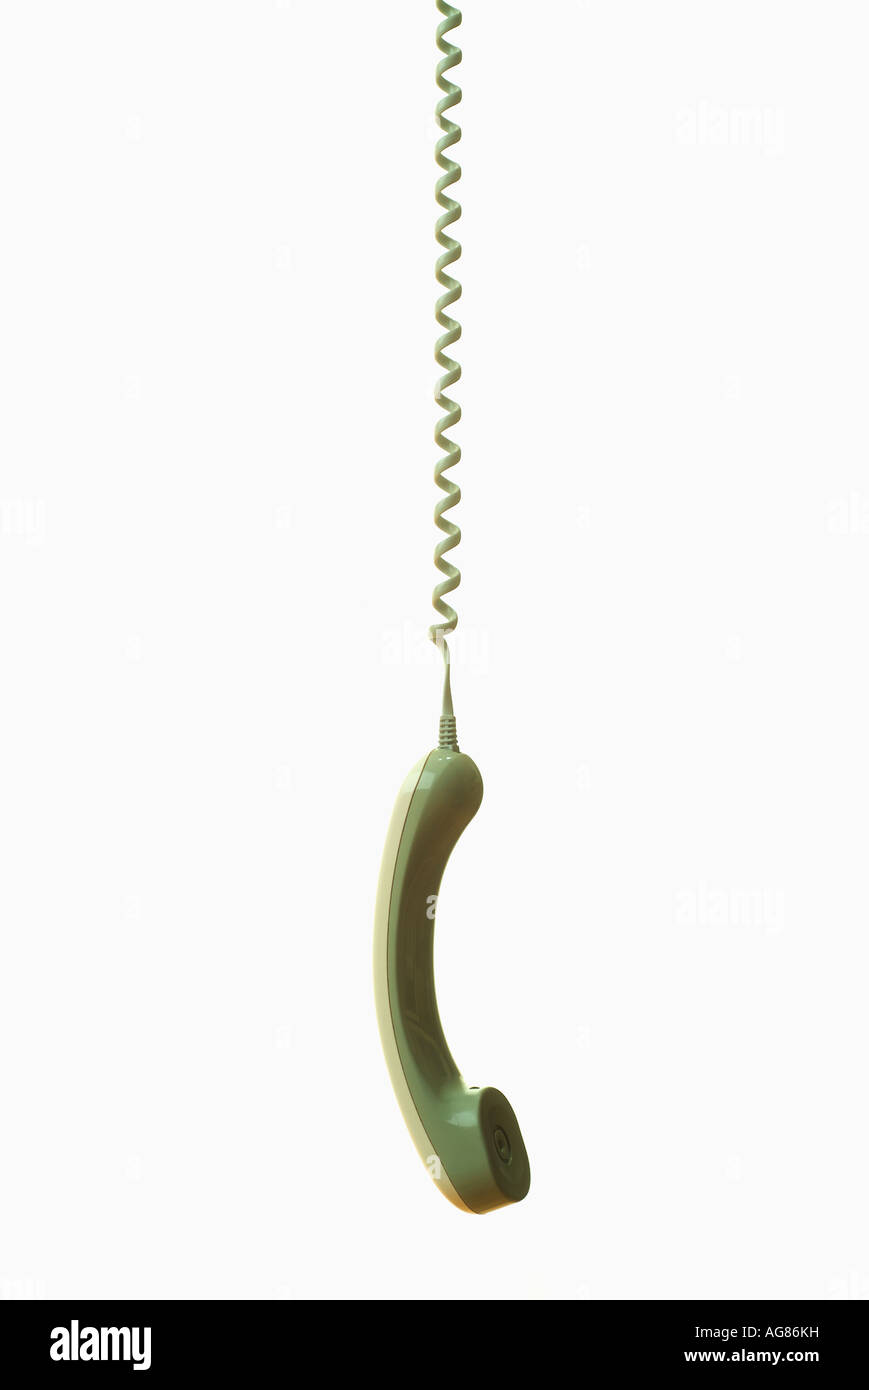 Phone hanging by cord Stock Photo